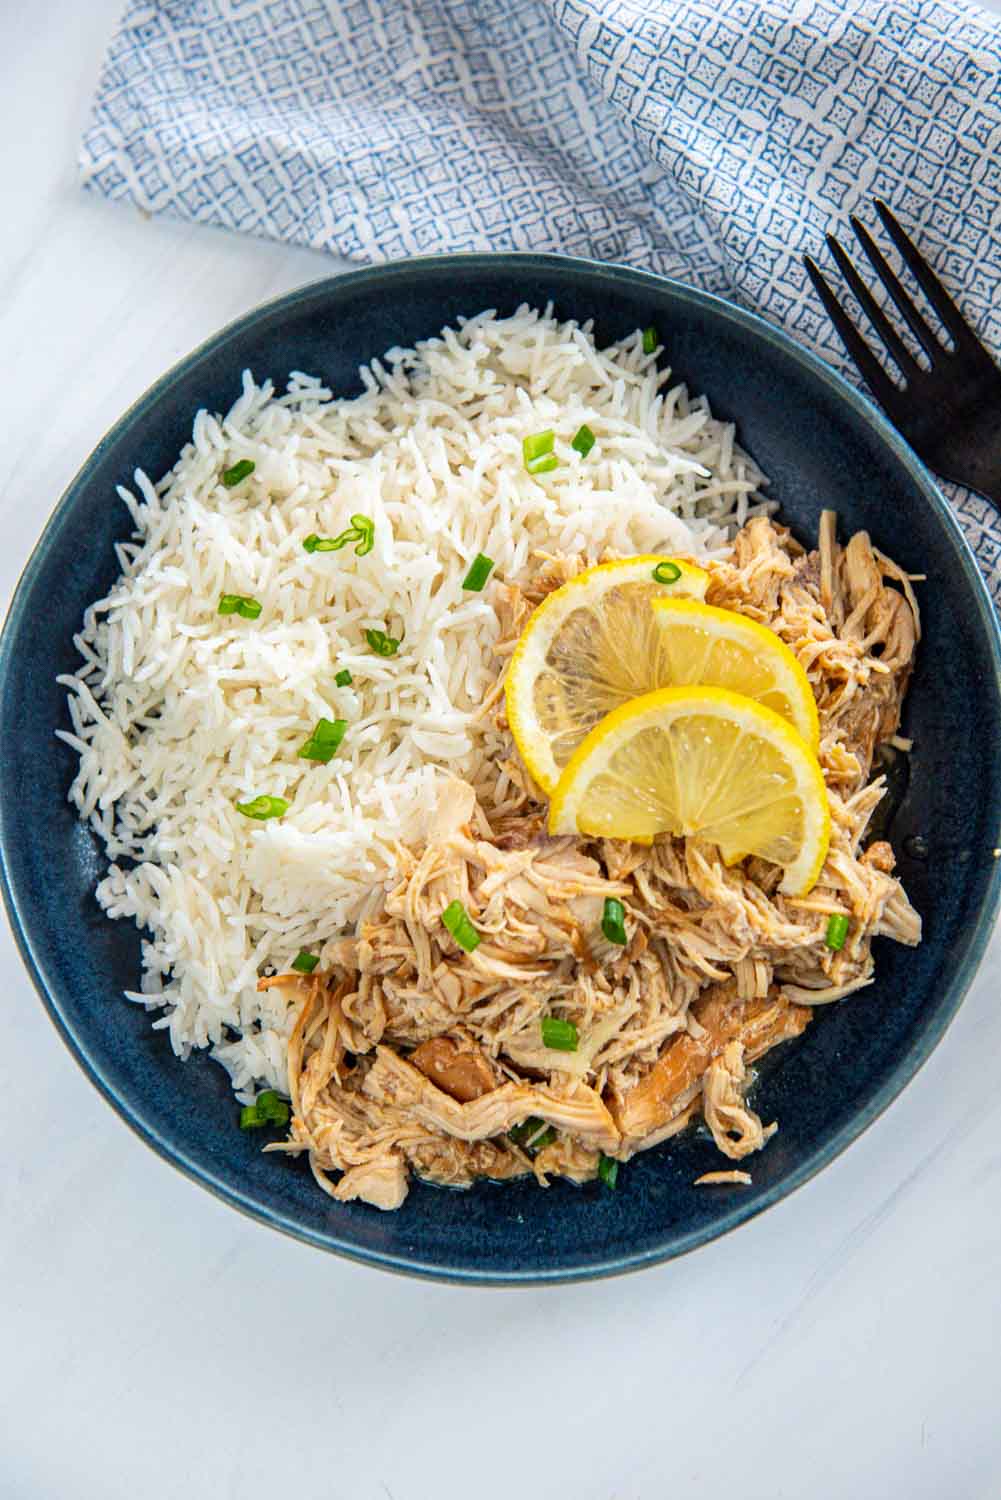 lemon chicken and rice on a blue plate